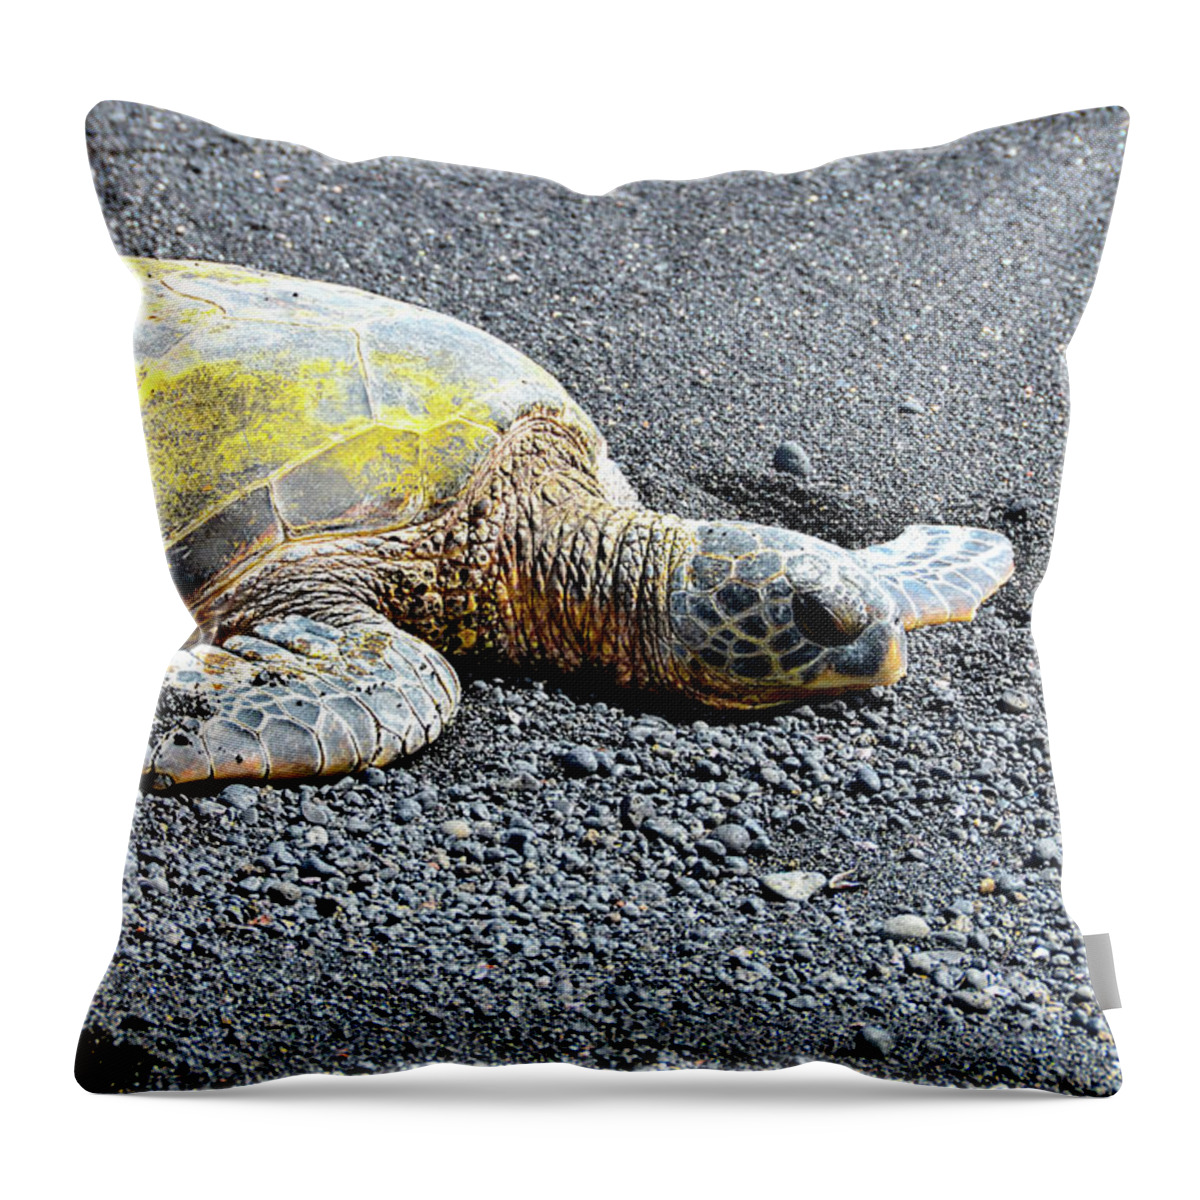 David Lawson Throw Pillow featuring the photograph Rest Time by David Lawson